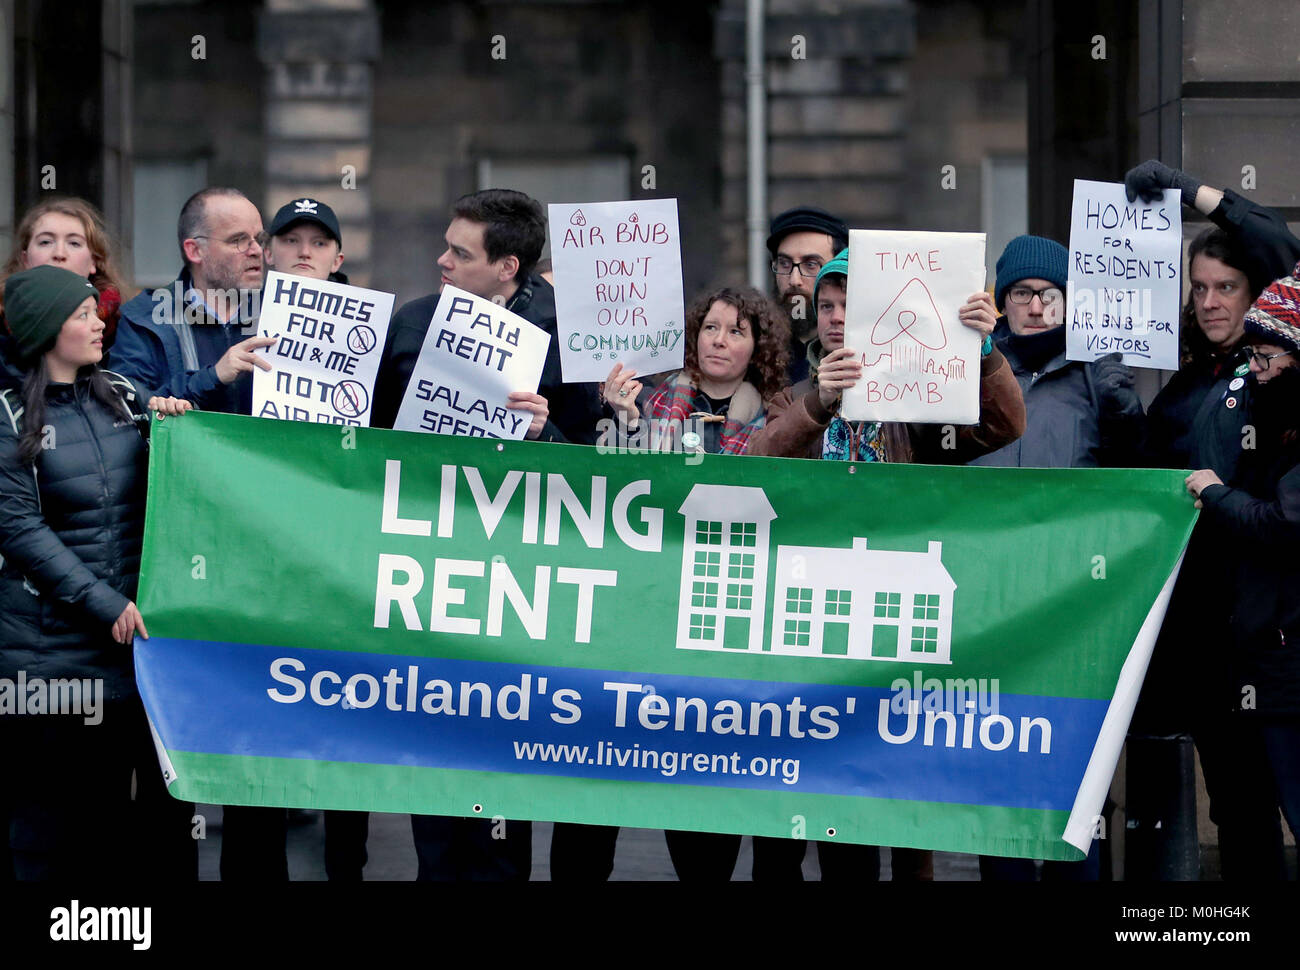 Members of Scotland's tenants' union Living Rent organised a protest outside the Edinburgh City Council Chamber to highlight concerns about the scarcity of housing which they claim is linked to Airbnb, and call upon the council to enforce tough restrictions on holiday lets. Stock Photo